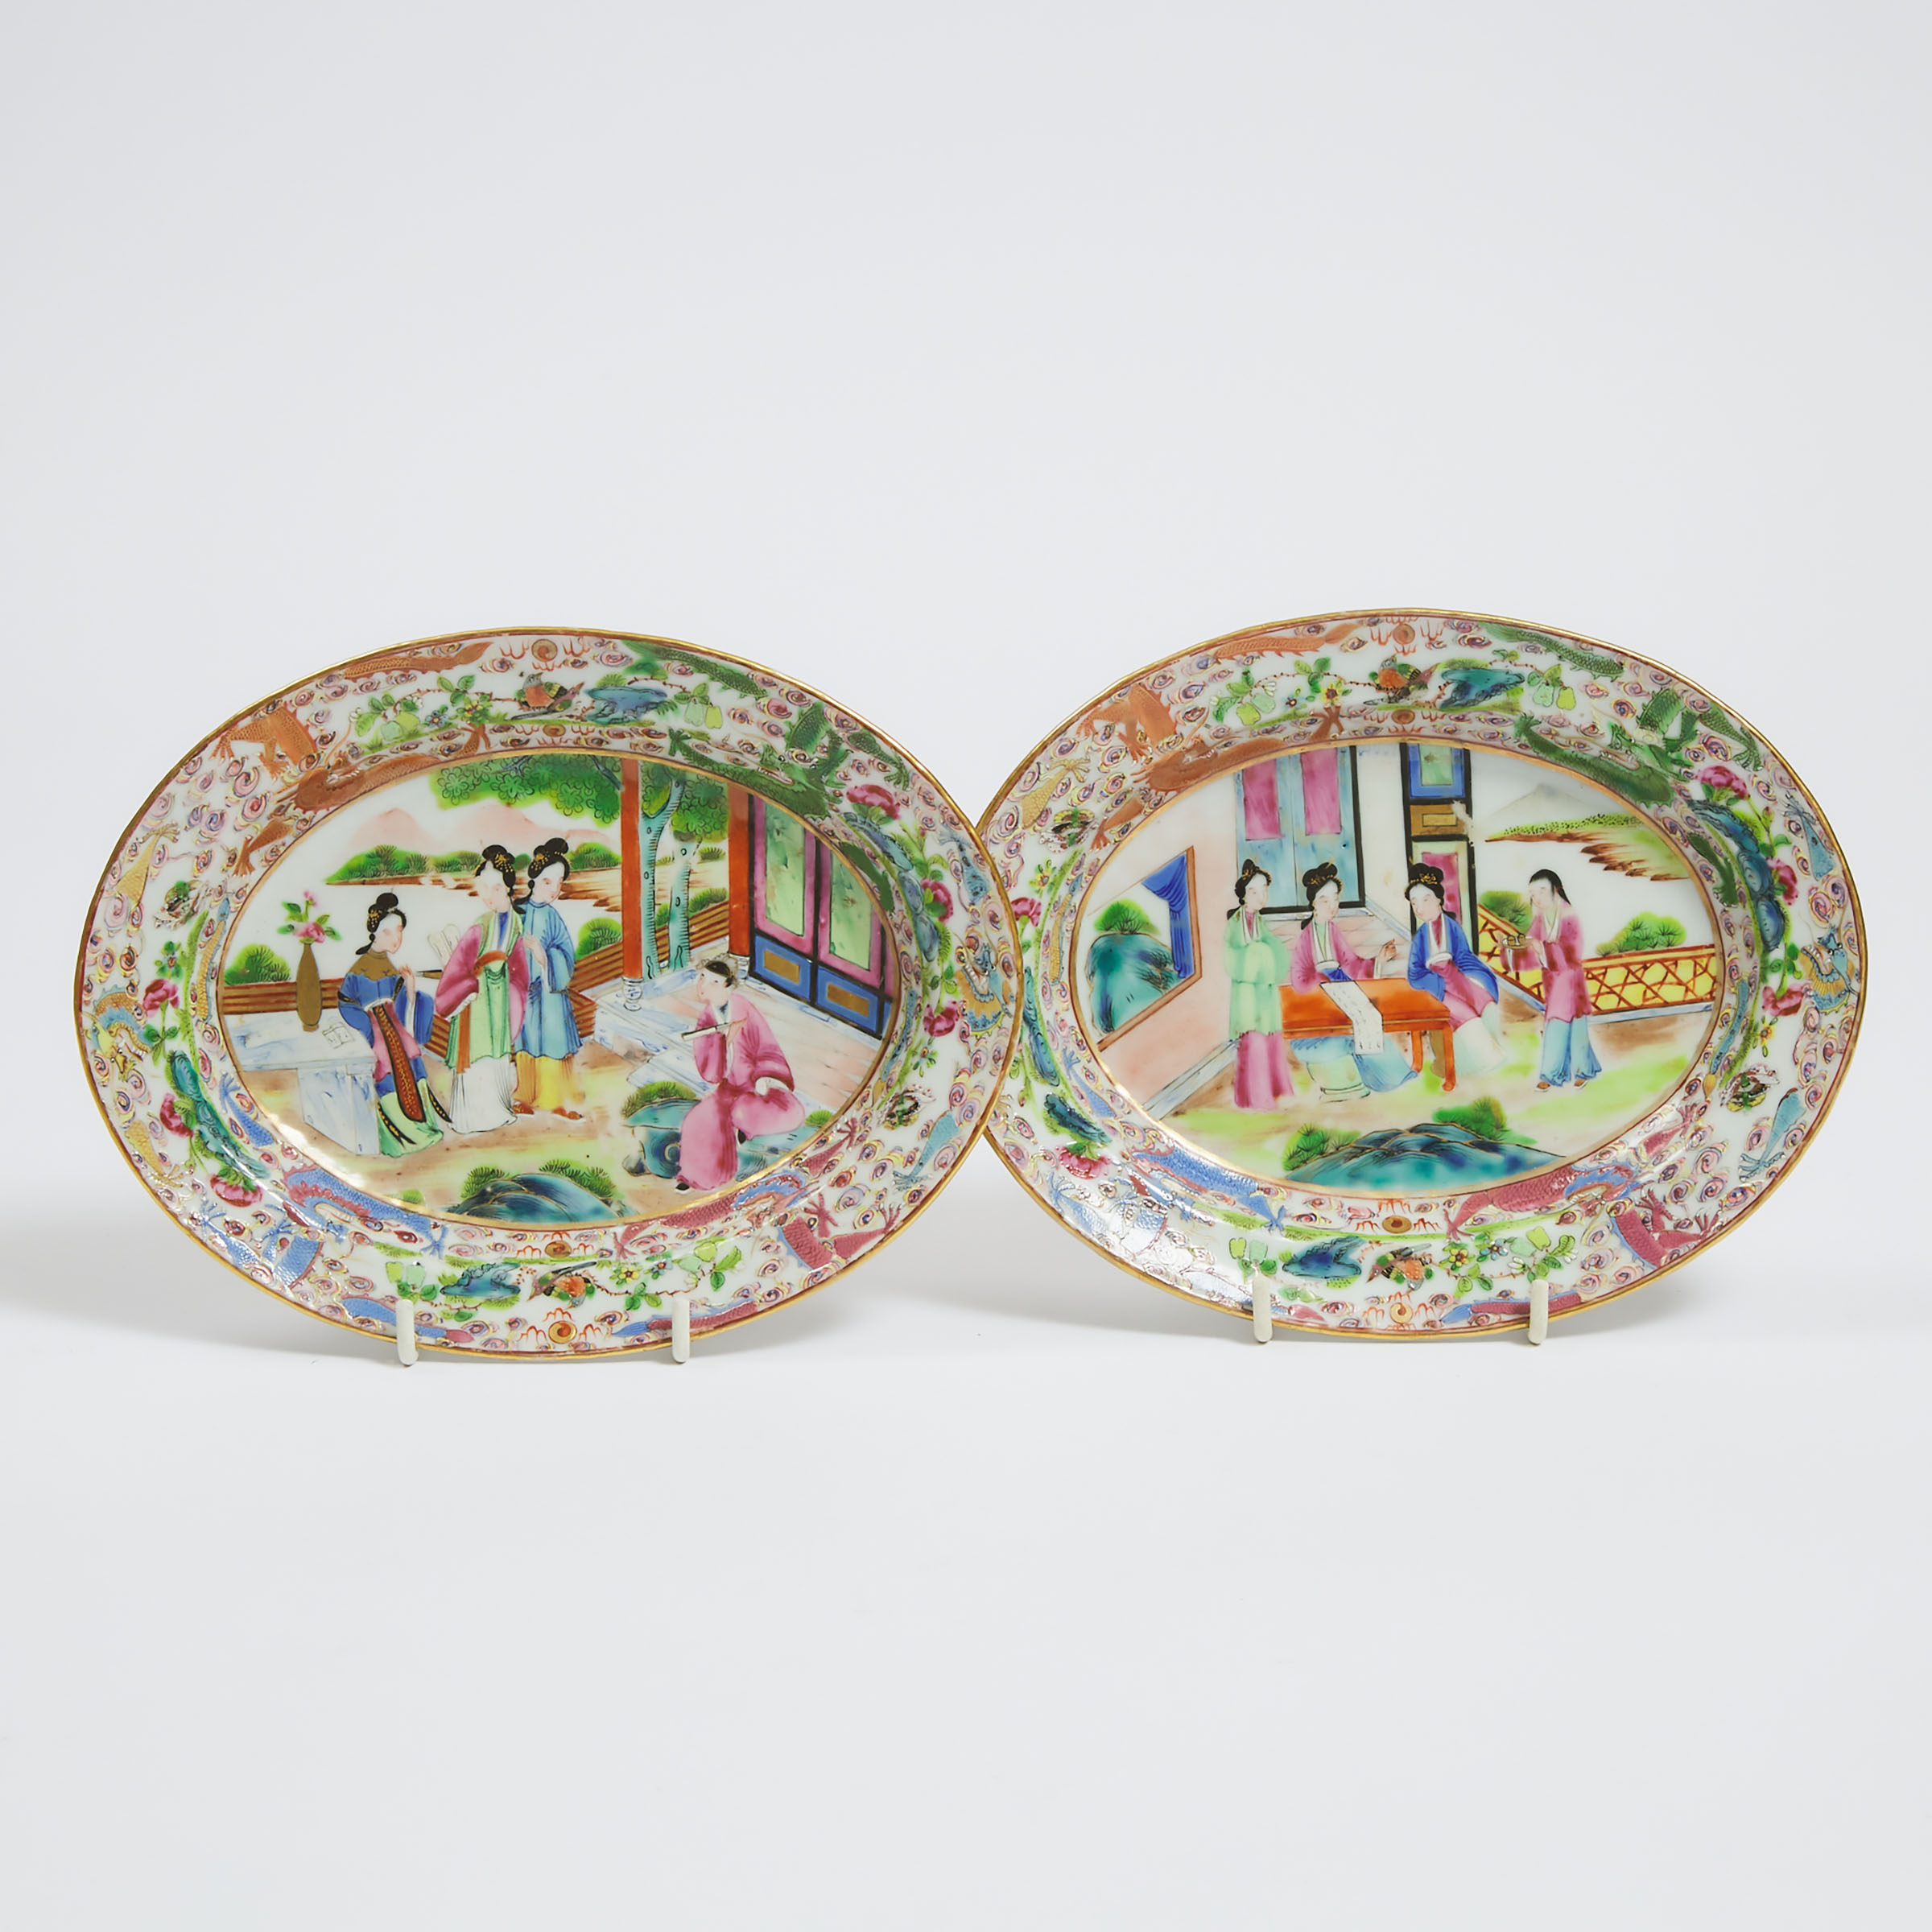 A Pair of Unusual Canton Famille Rose 'Figural' Dishes, Early 19th Century